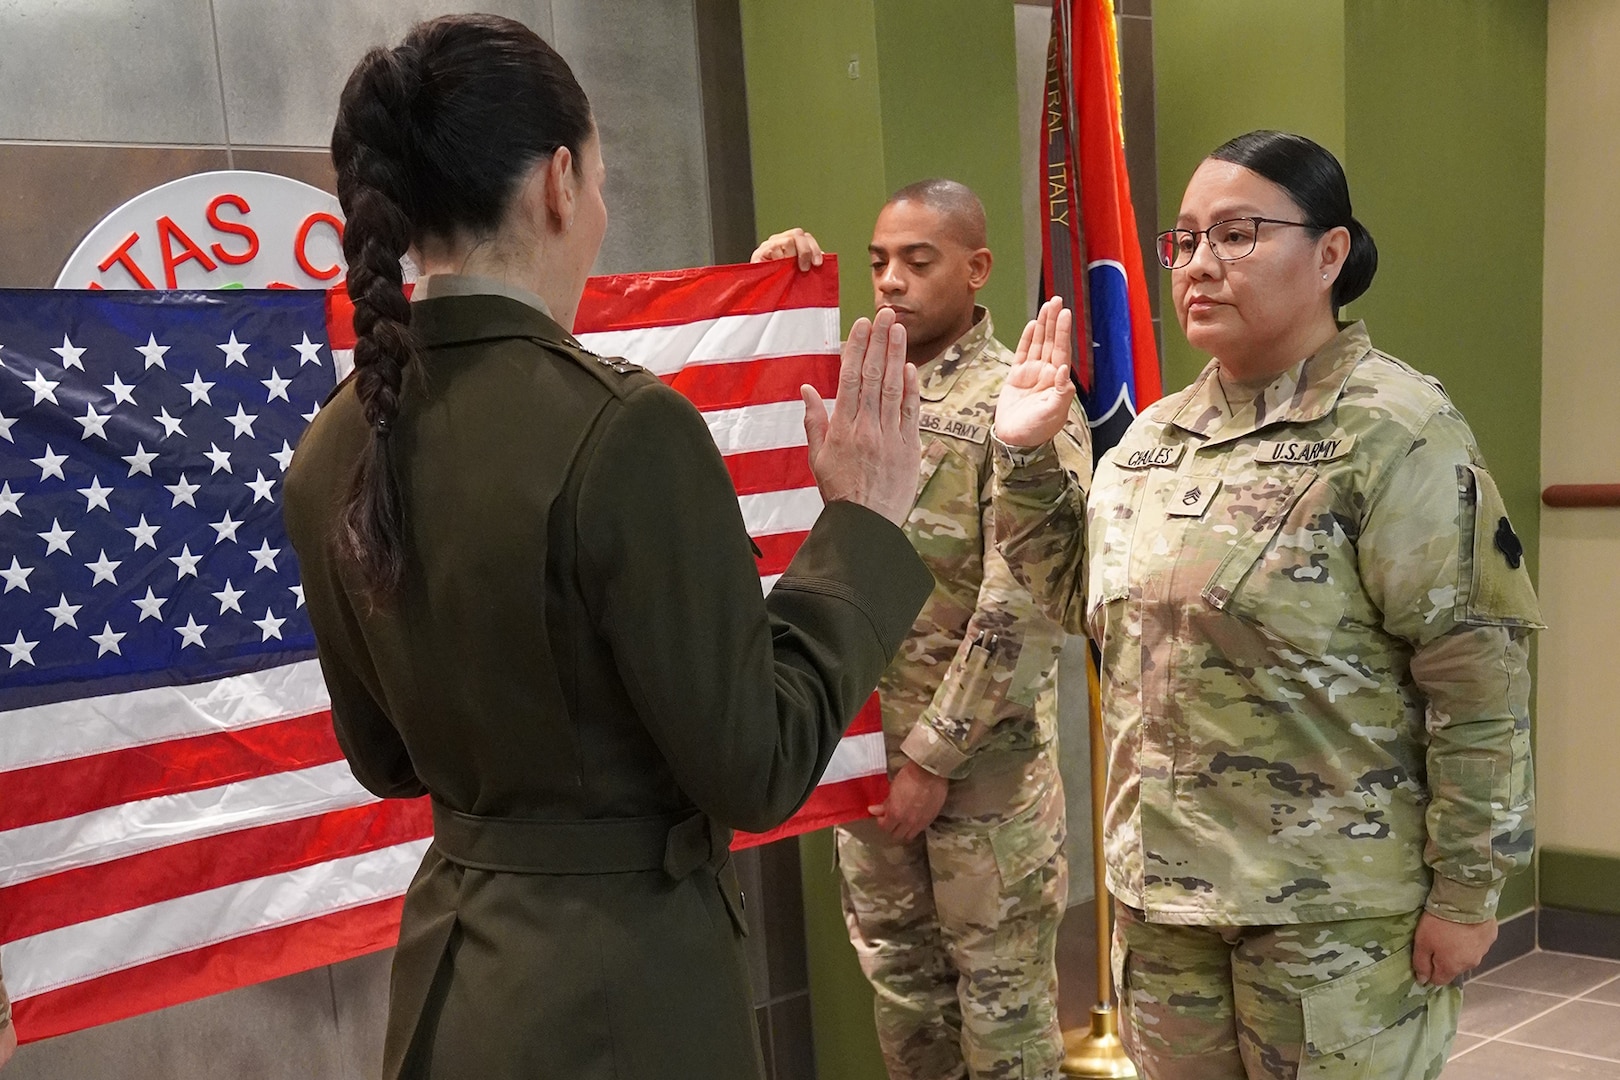 Two women in military uniform stand before each other with their right hands raised. A man in uniform stands in the background holding the American flag.